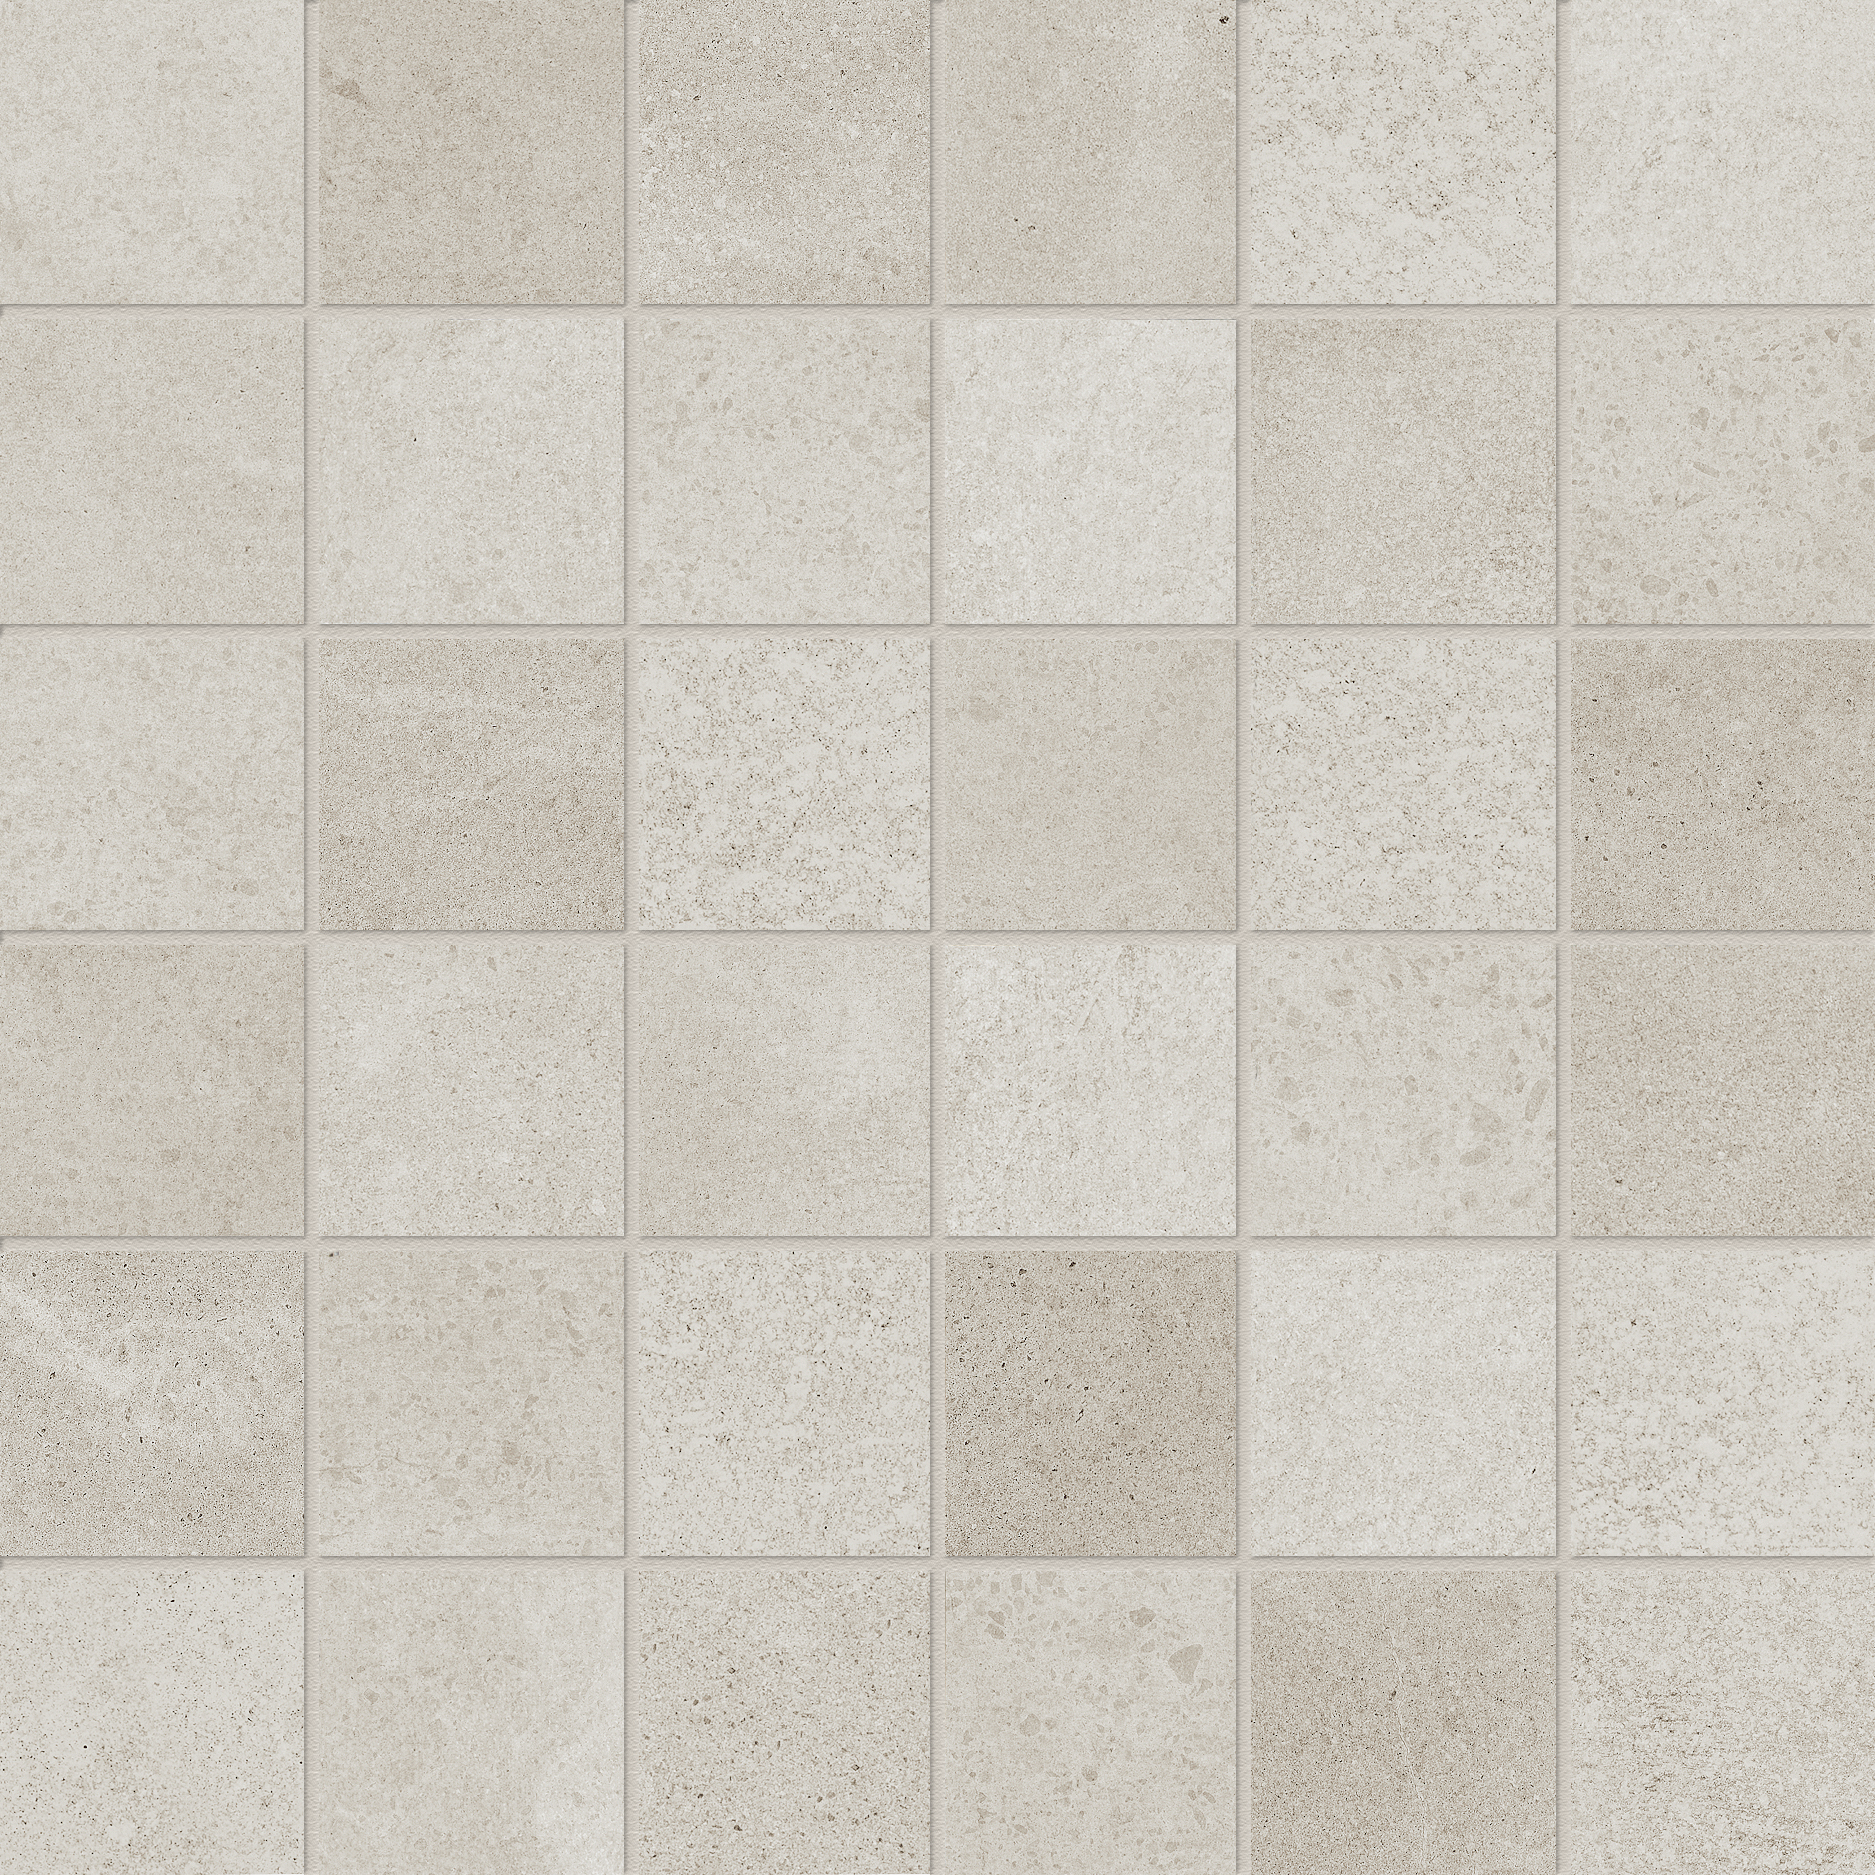 zinc straight stack 2x2-inch pattern color body porcelain mosaic from industria anatolia collection distributed by surface group international matte finish straight edge edge mesh shape